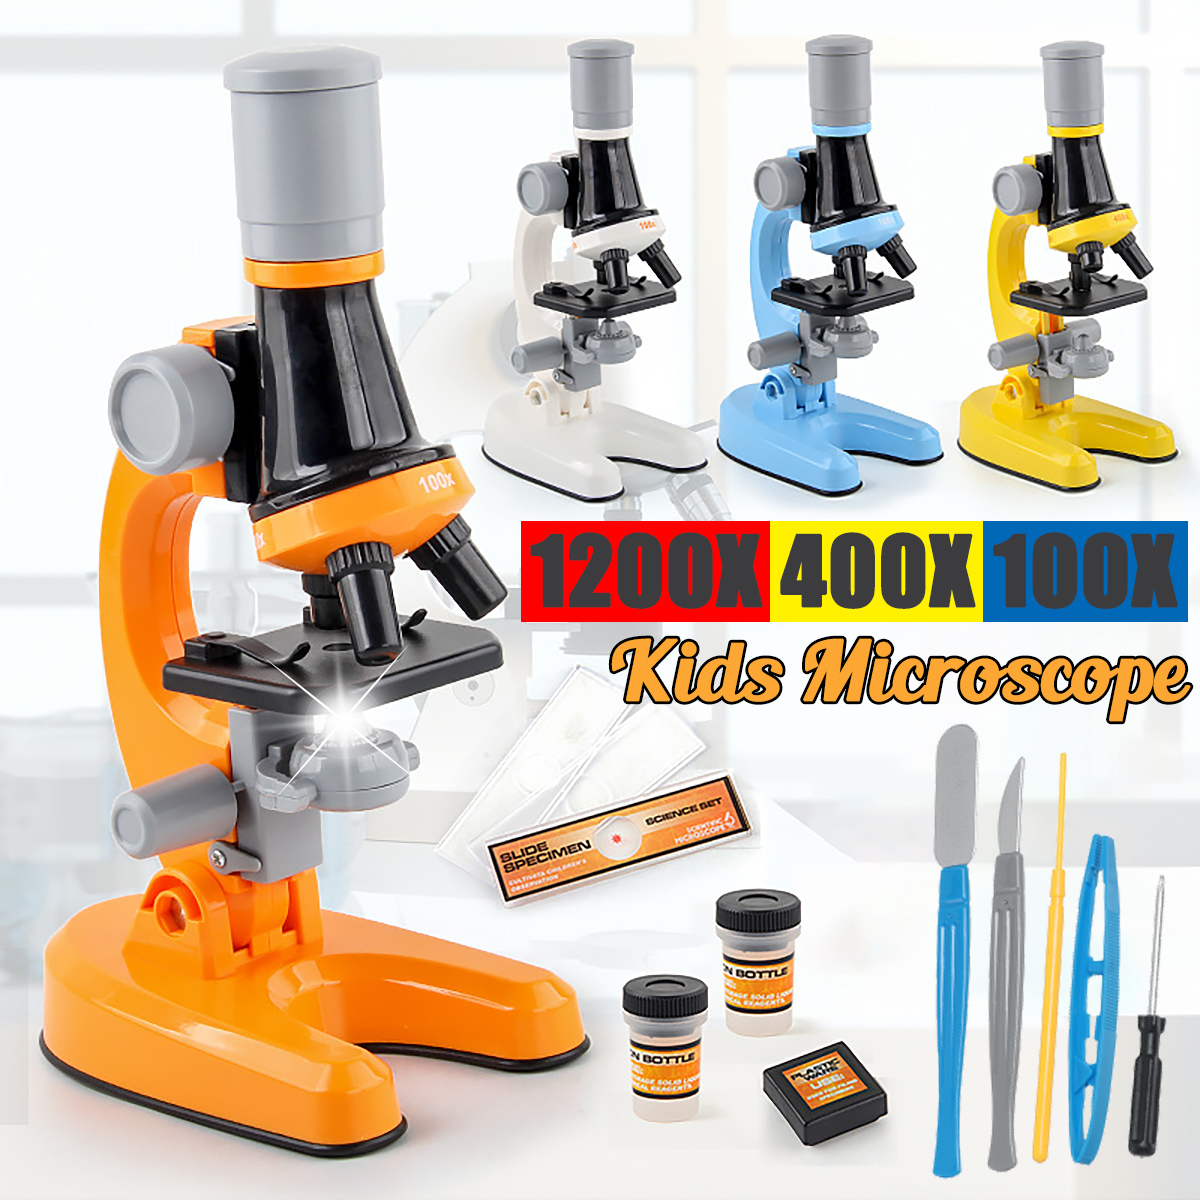 1200X-400X-100X-Magnification-Kids-Microscope-Children-Science-Educational-Toy-for-Science-Experimen-1854876-1